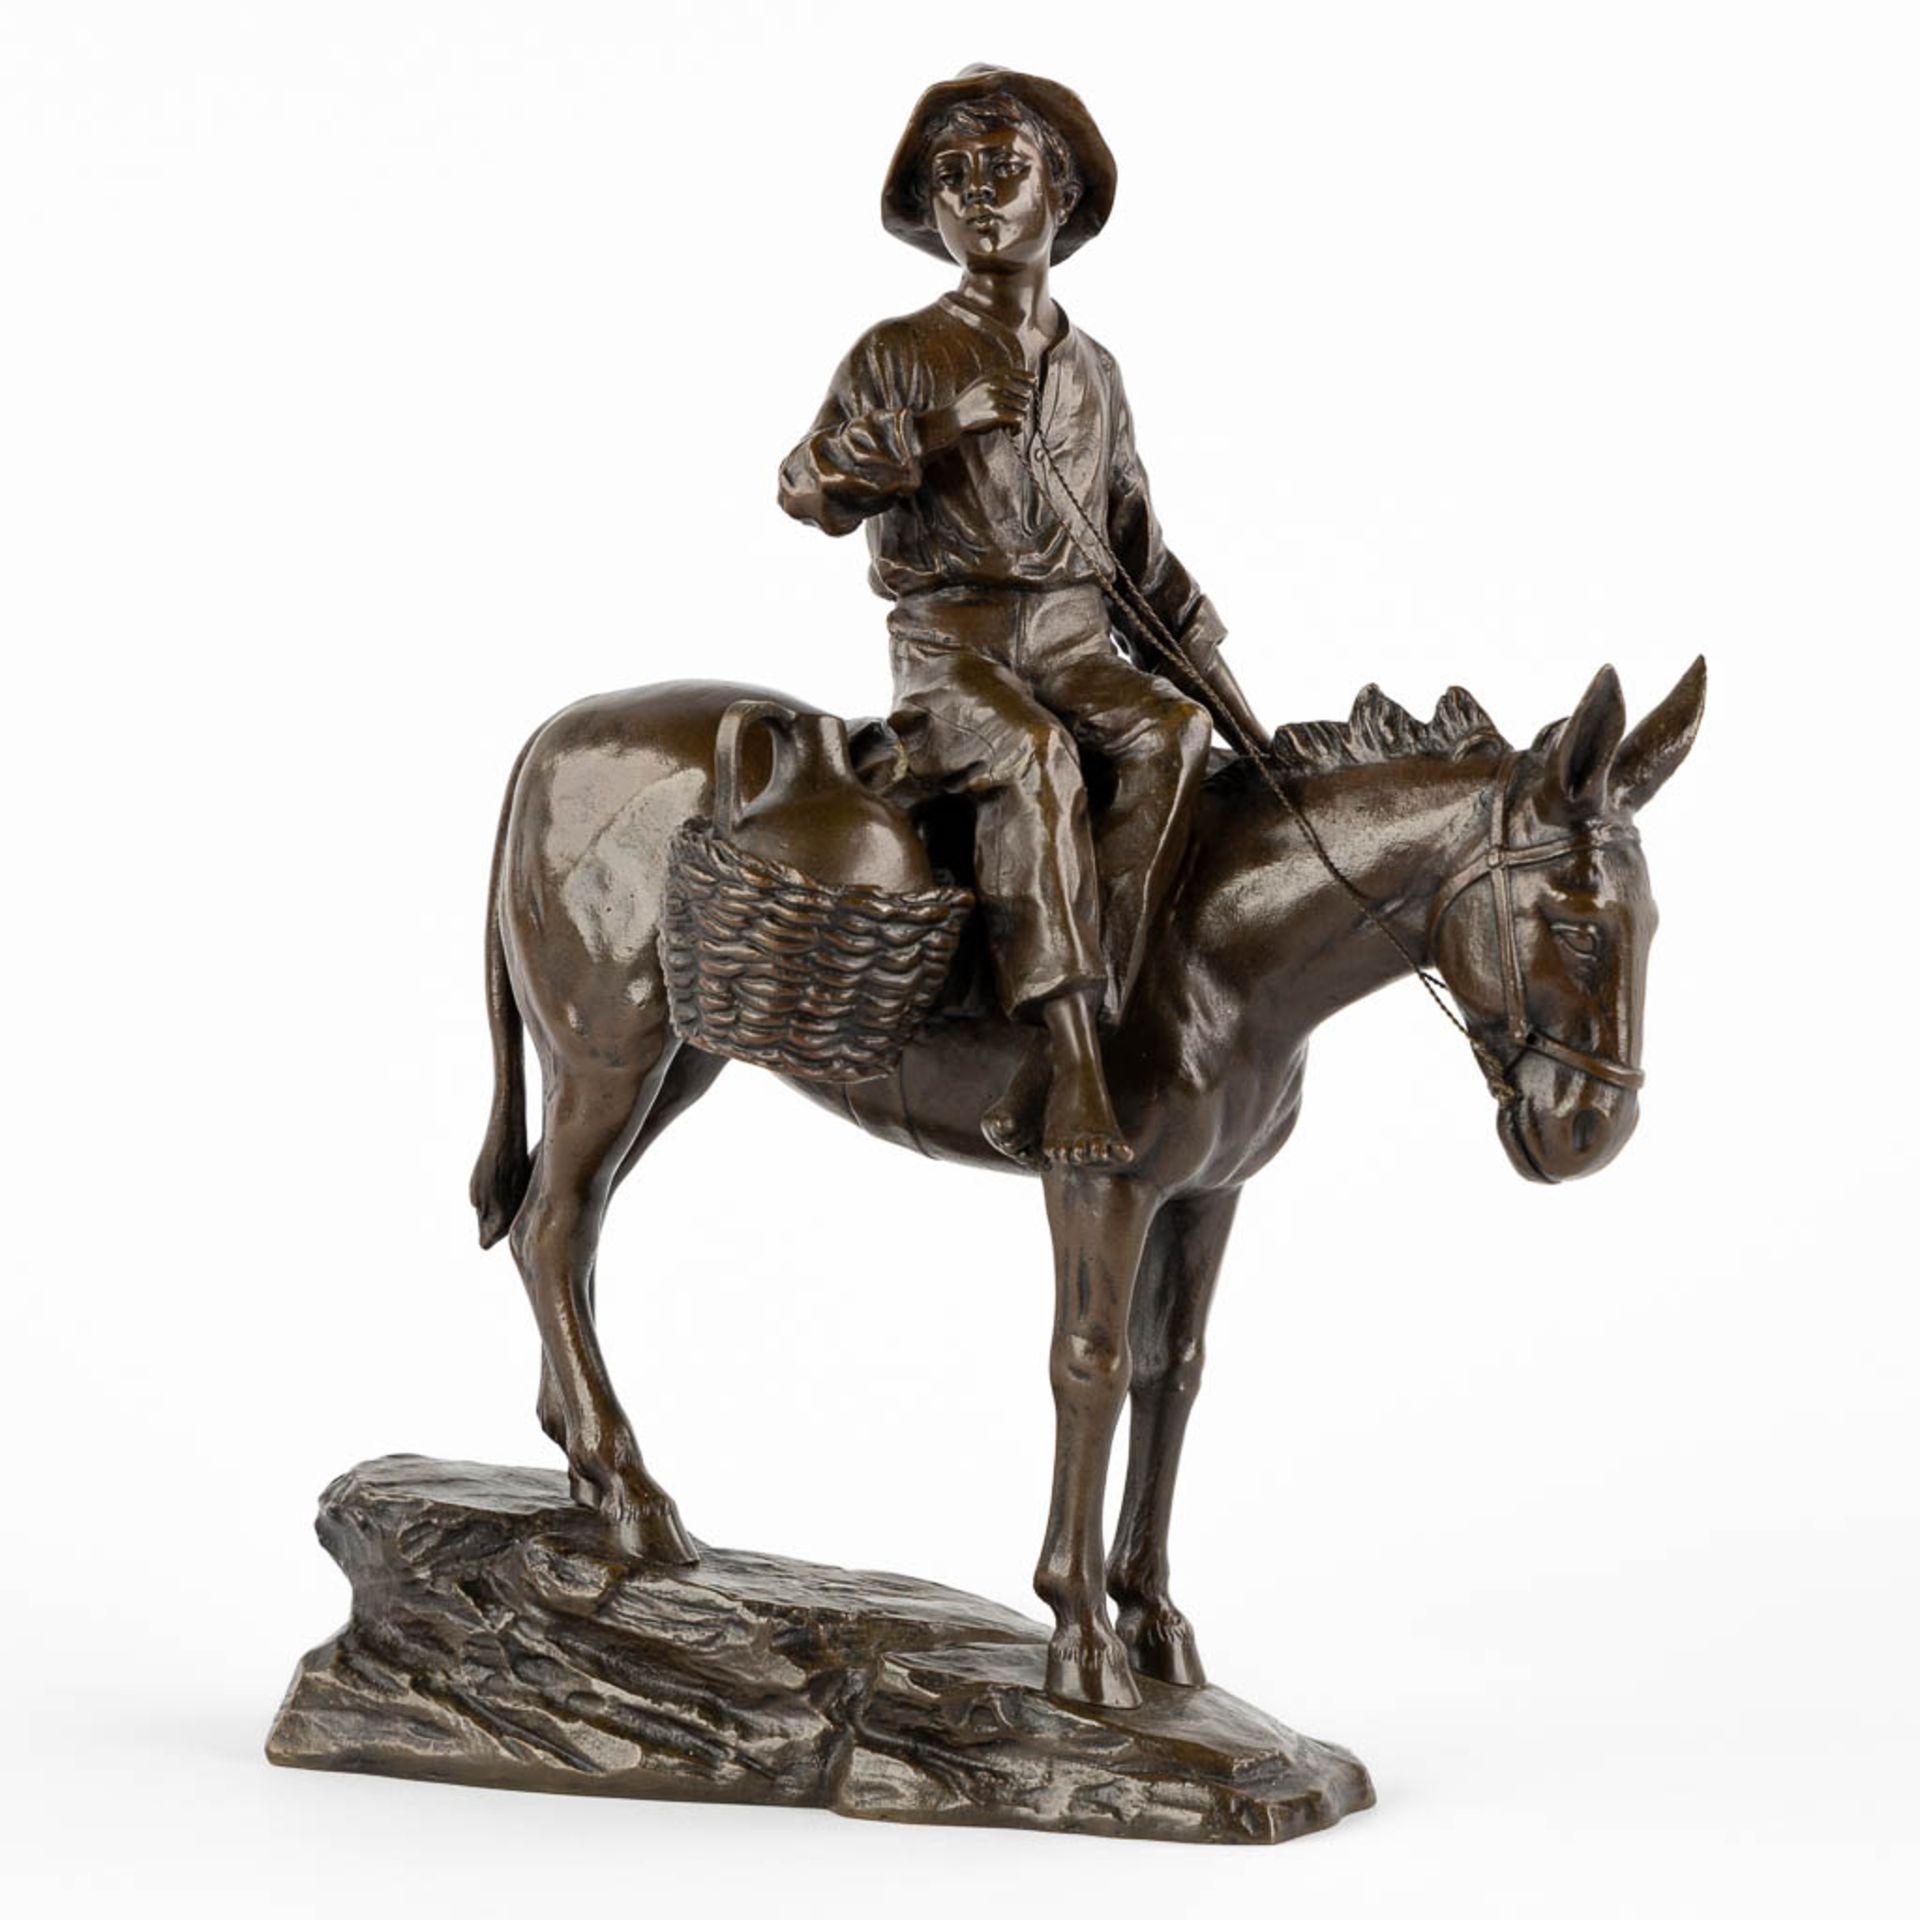 A small figurine of a young man riding a donkey, patinated bronze. Circa 1900. (L:18 x W:28 x H:33 c